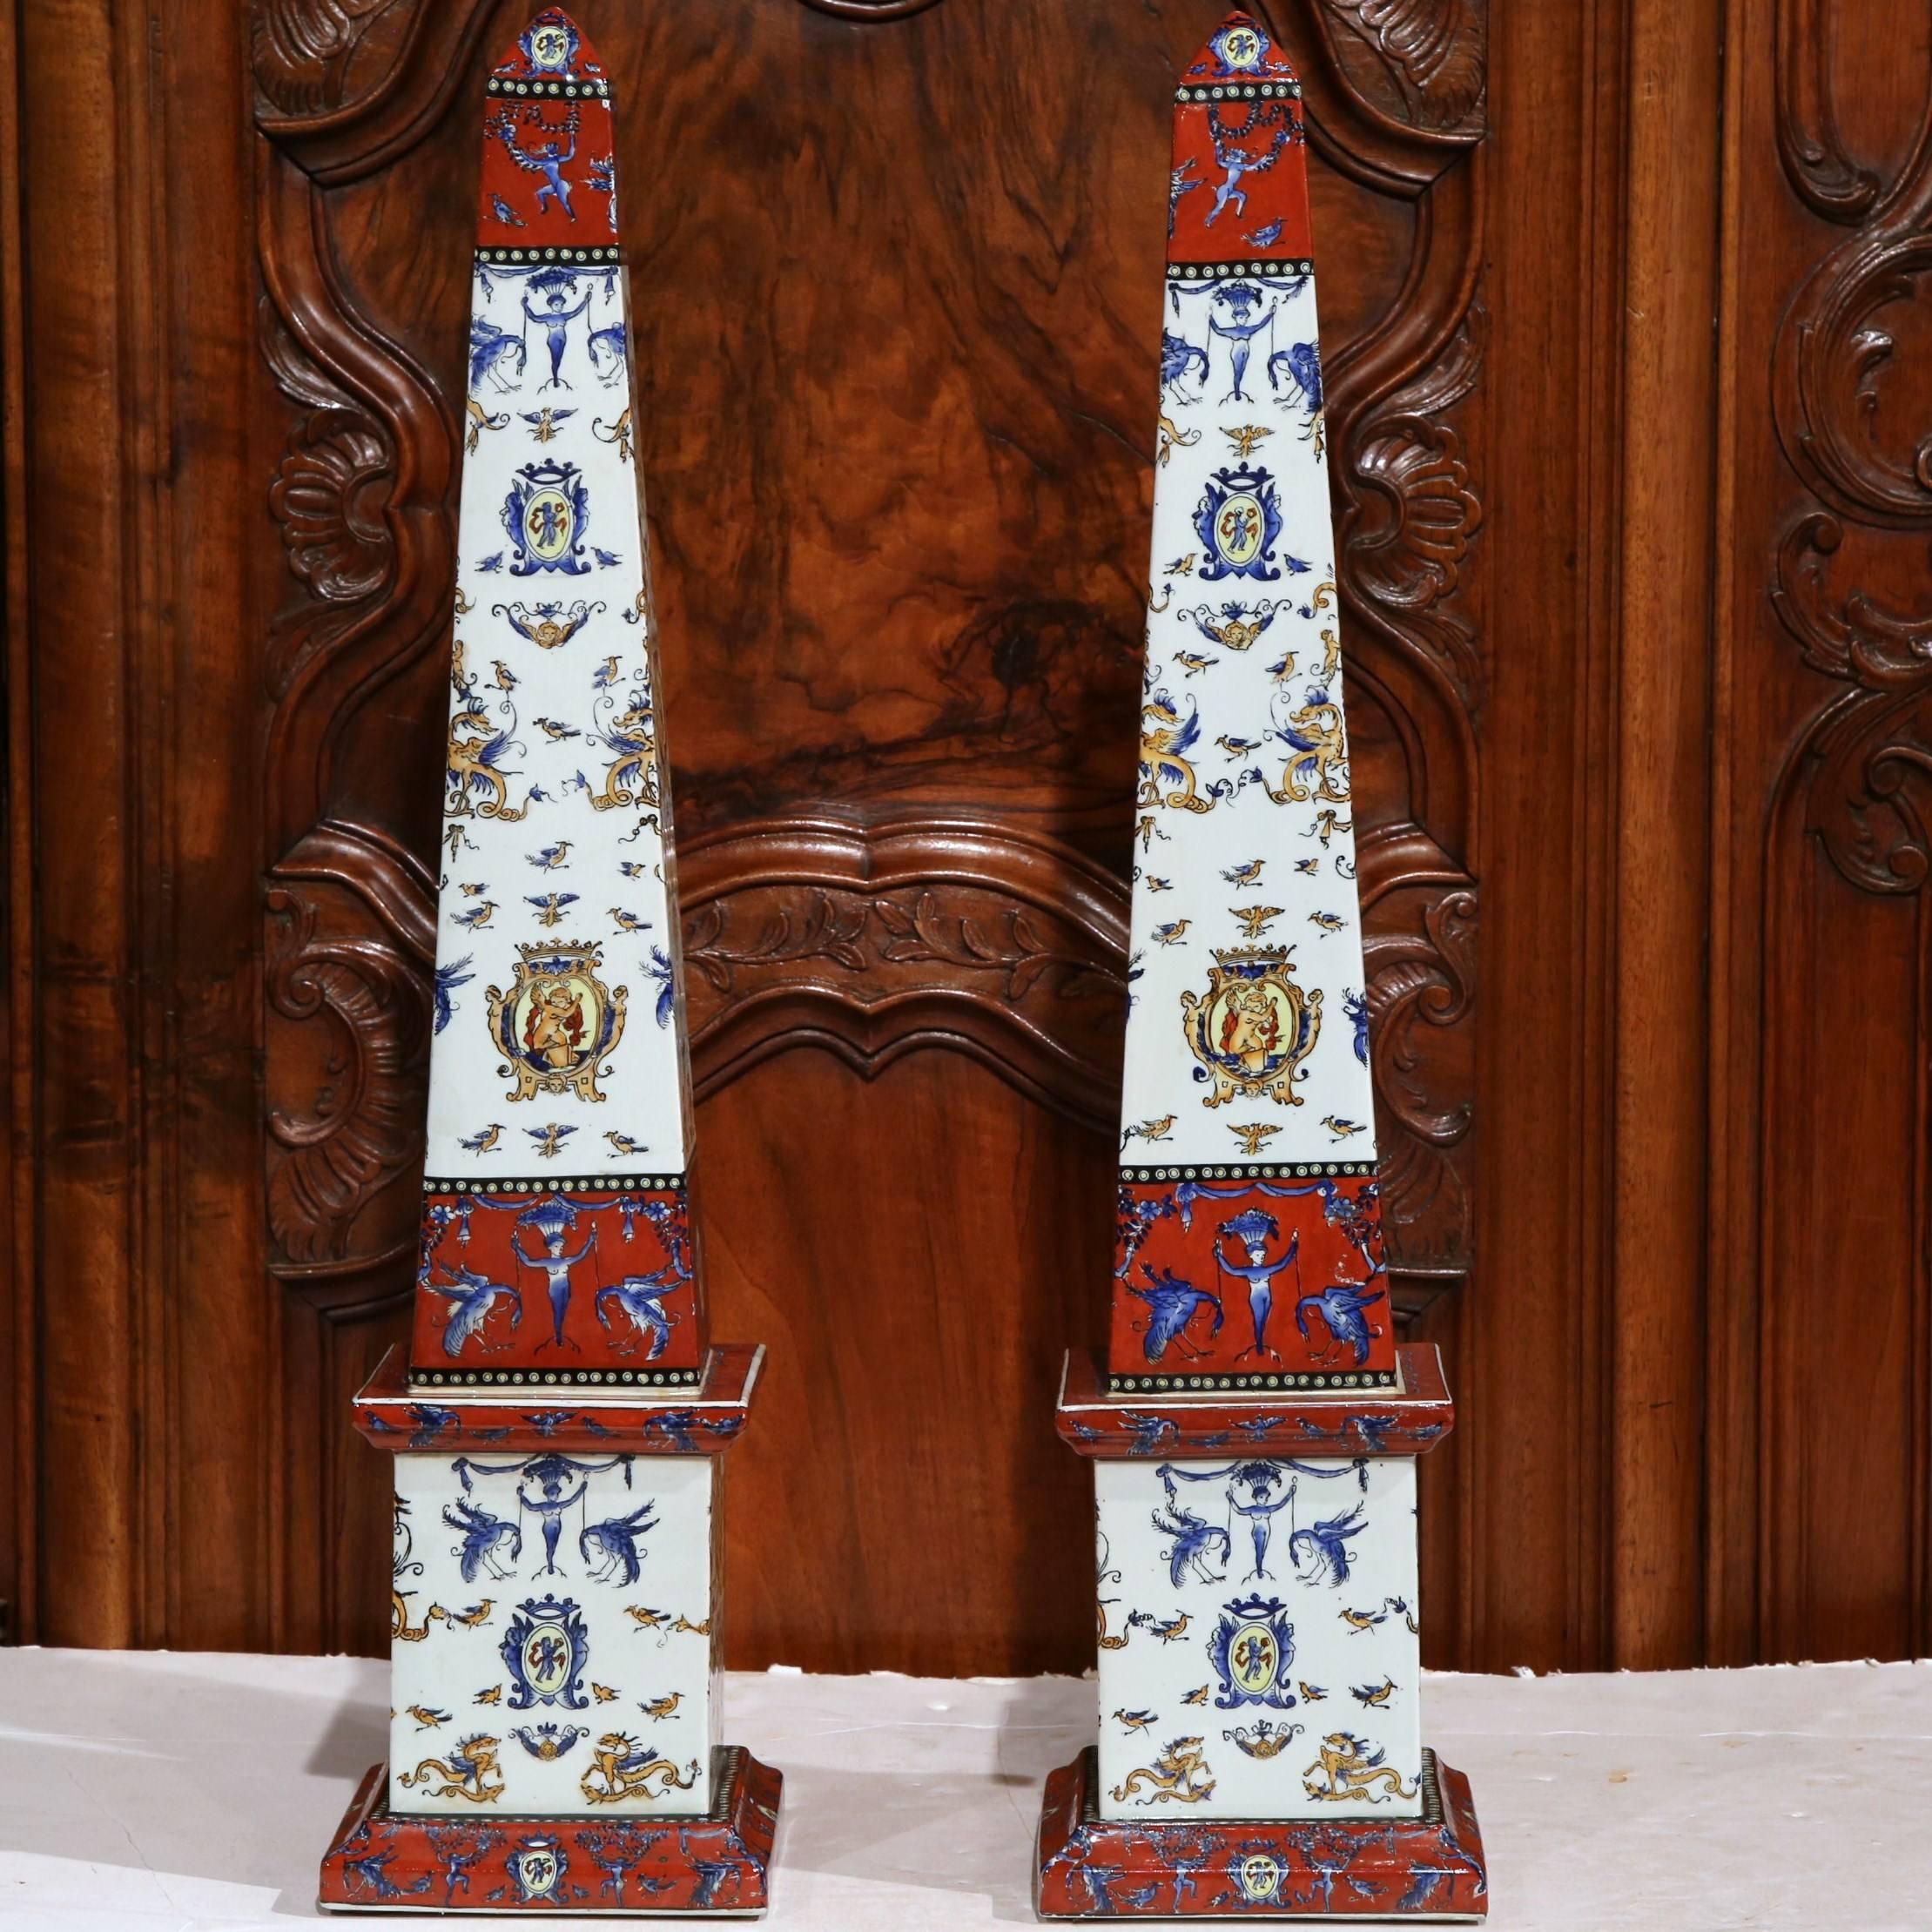 This tall pair of antique obelisks came from “ Faïencerie de Gien”, France, circa 1860. These pieces make a statement with their strong shape and ornate red, white and yellow color palette. Excellent condition with rich old patina.
 The Faïencerie